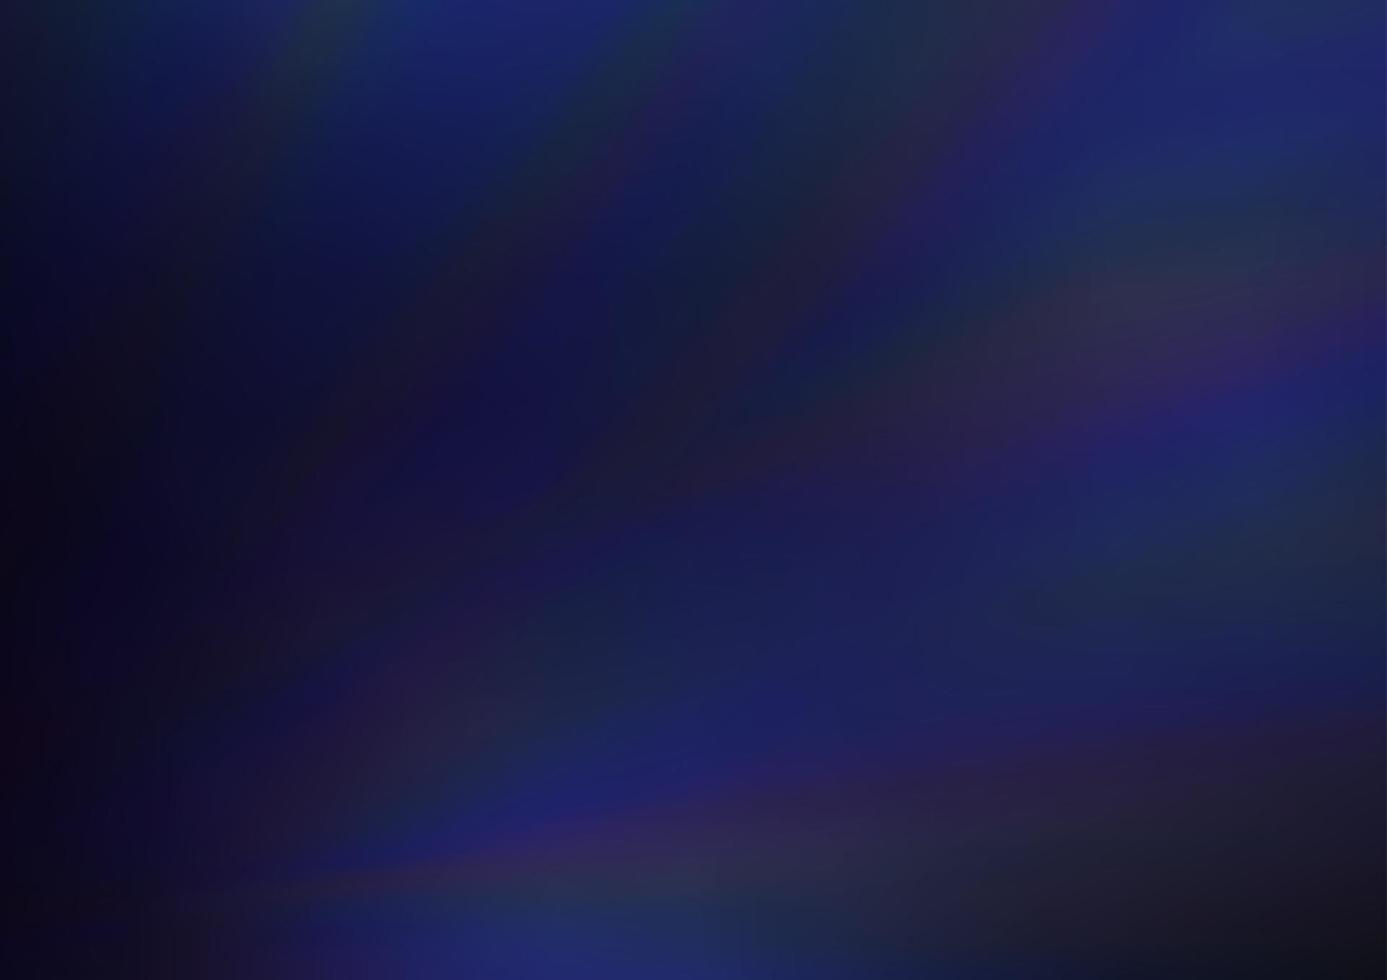 Dark BLUE vector blurred shine abstract template.